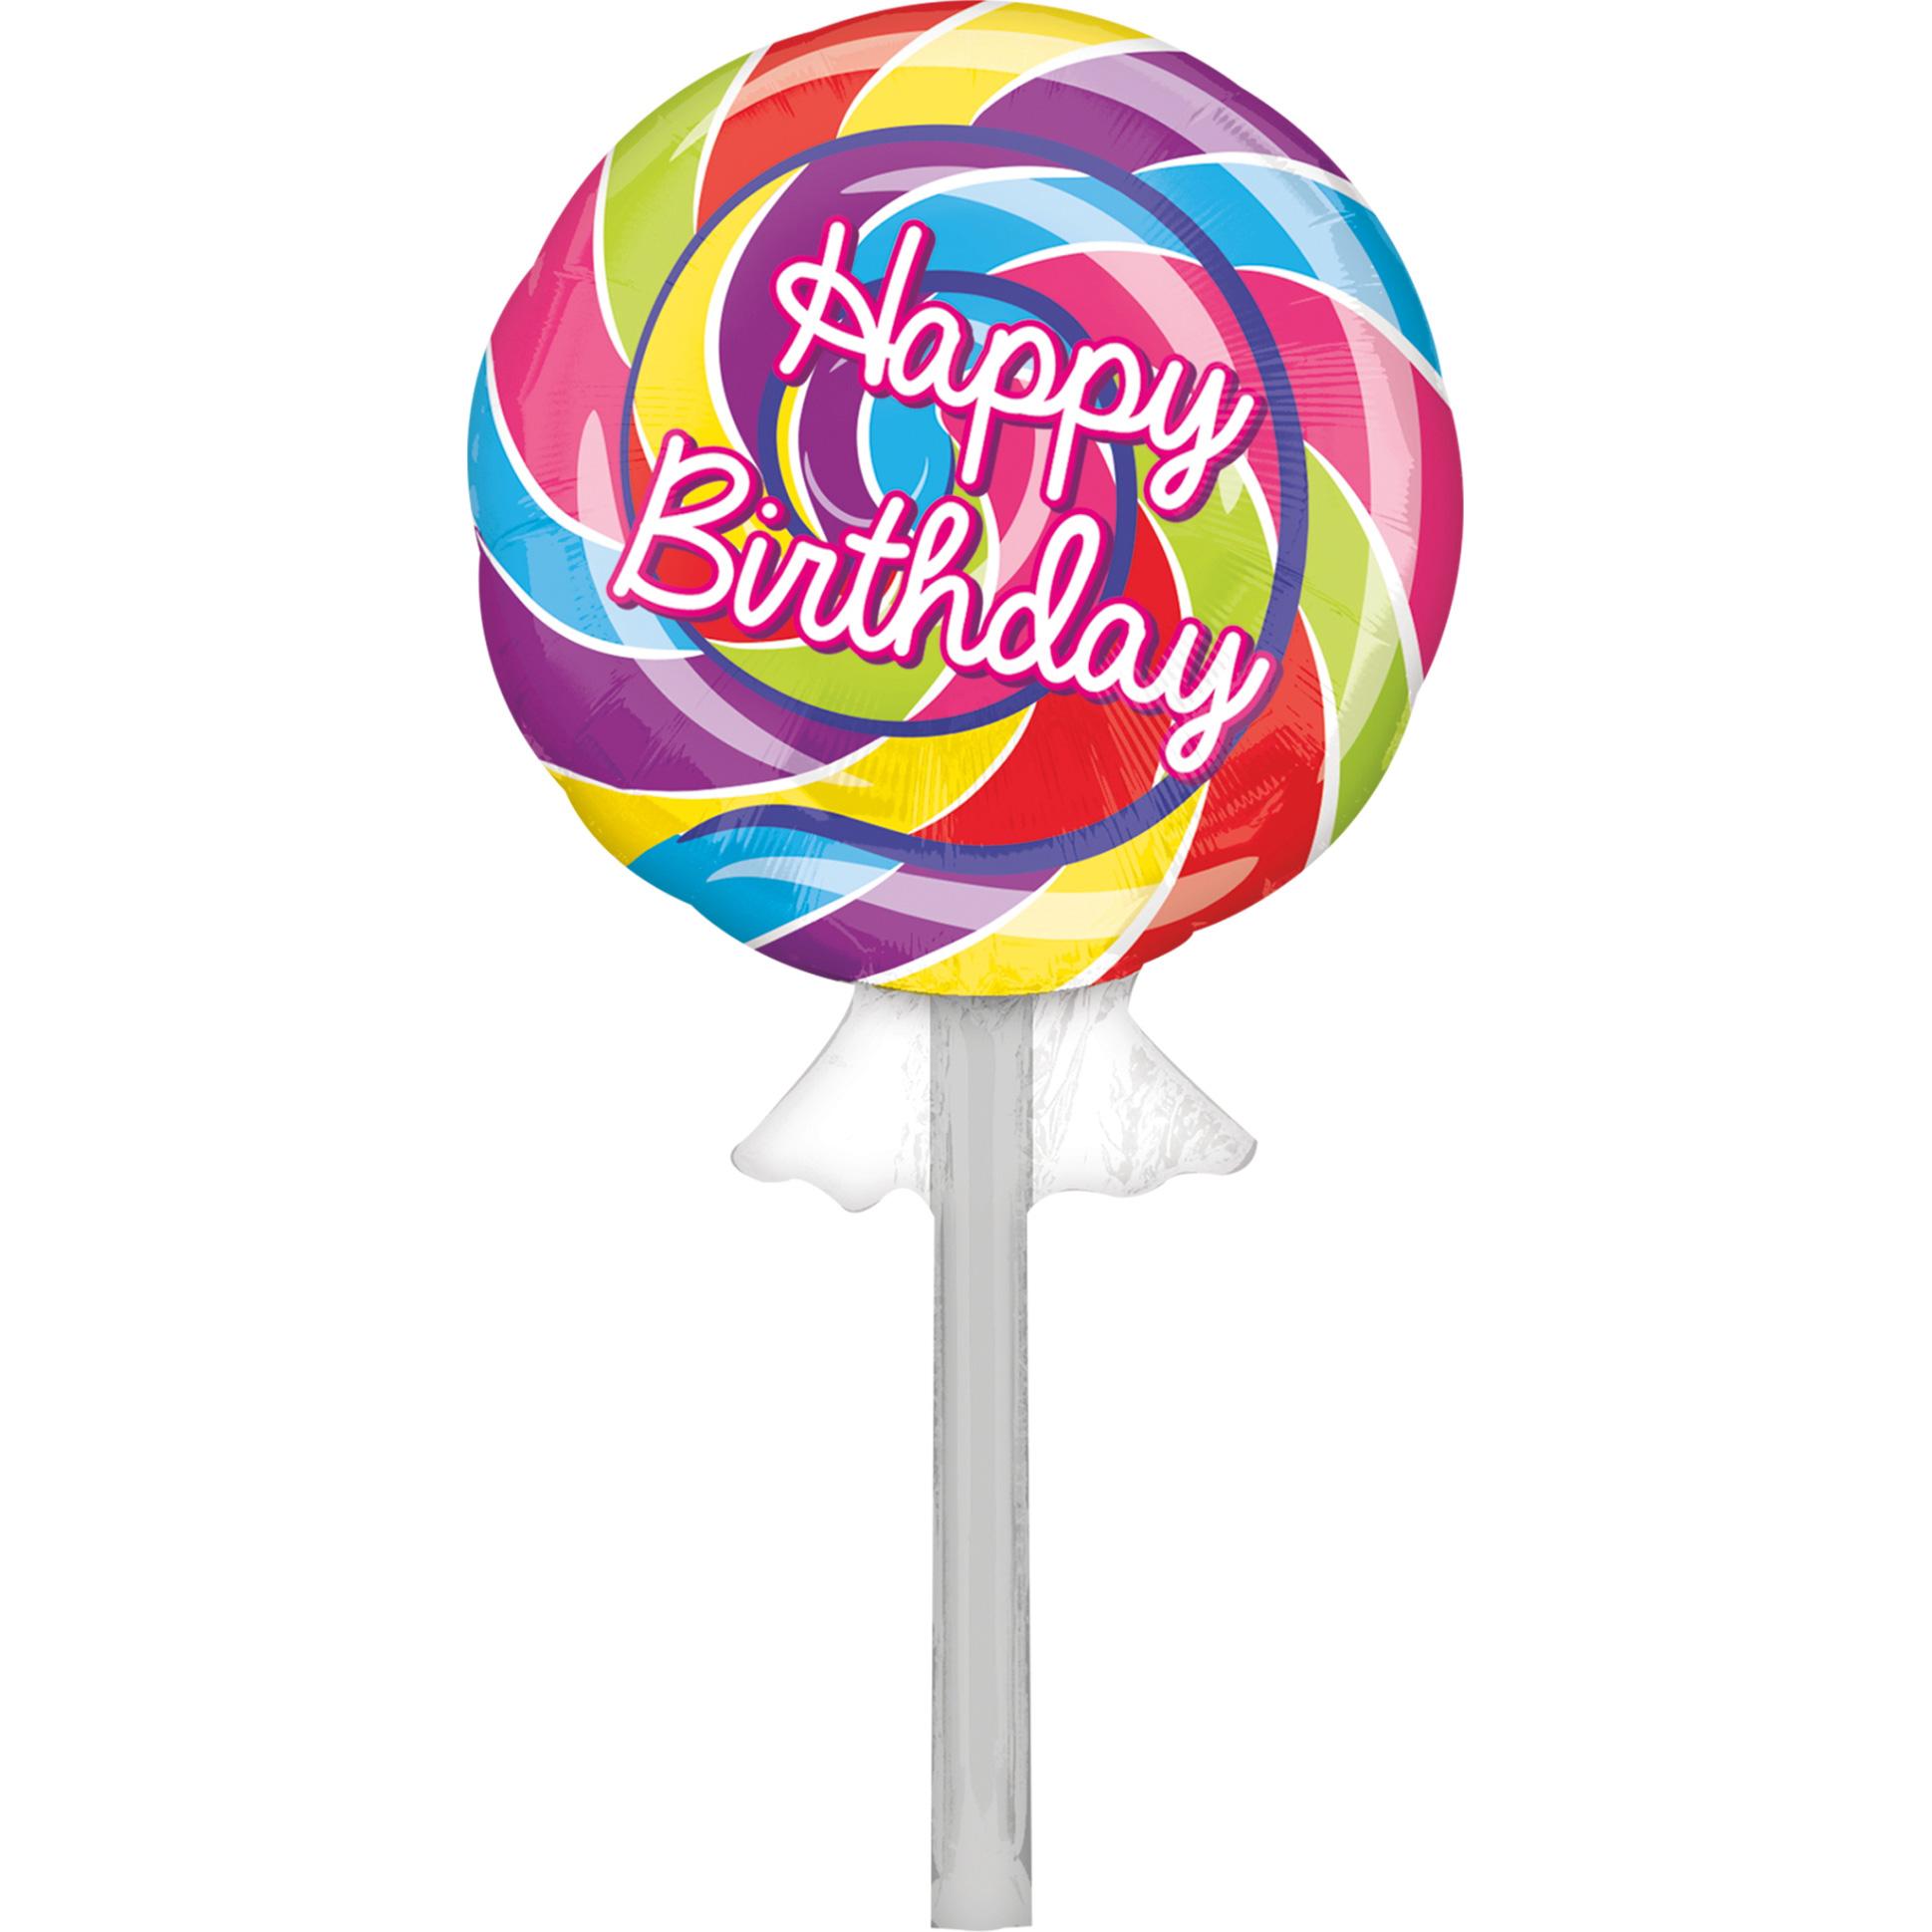 Very Sweet Day Super Shape Balloon Balloons & Streamers - Party Centre